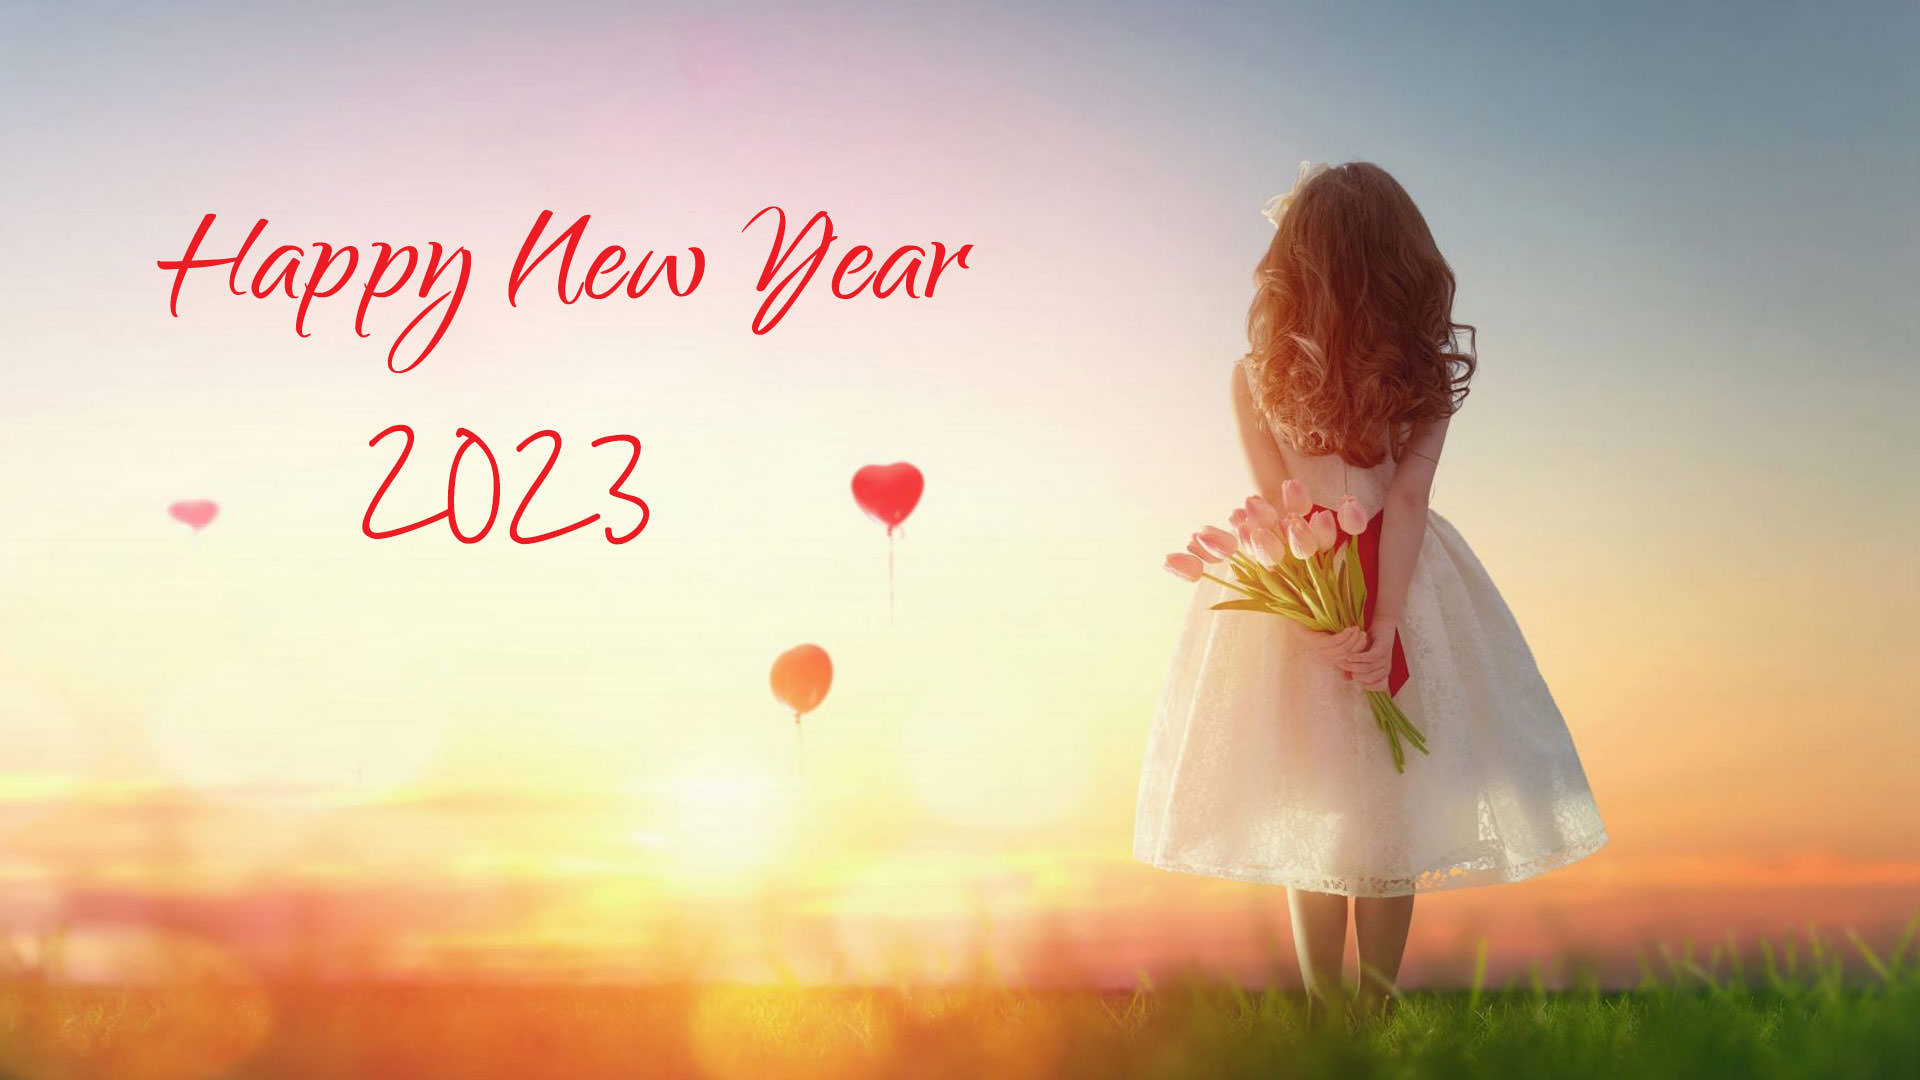 Alone Girl with Flowers New Year 2023 Wishes Wallpaper